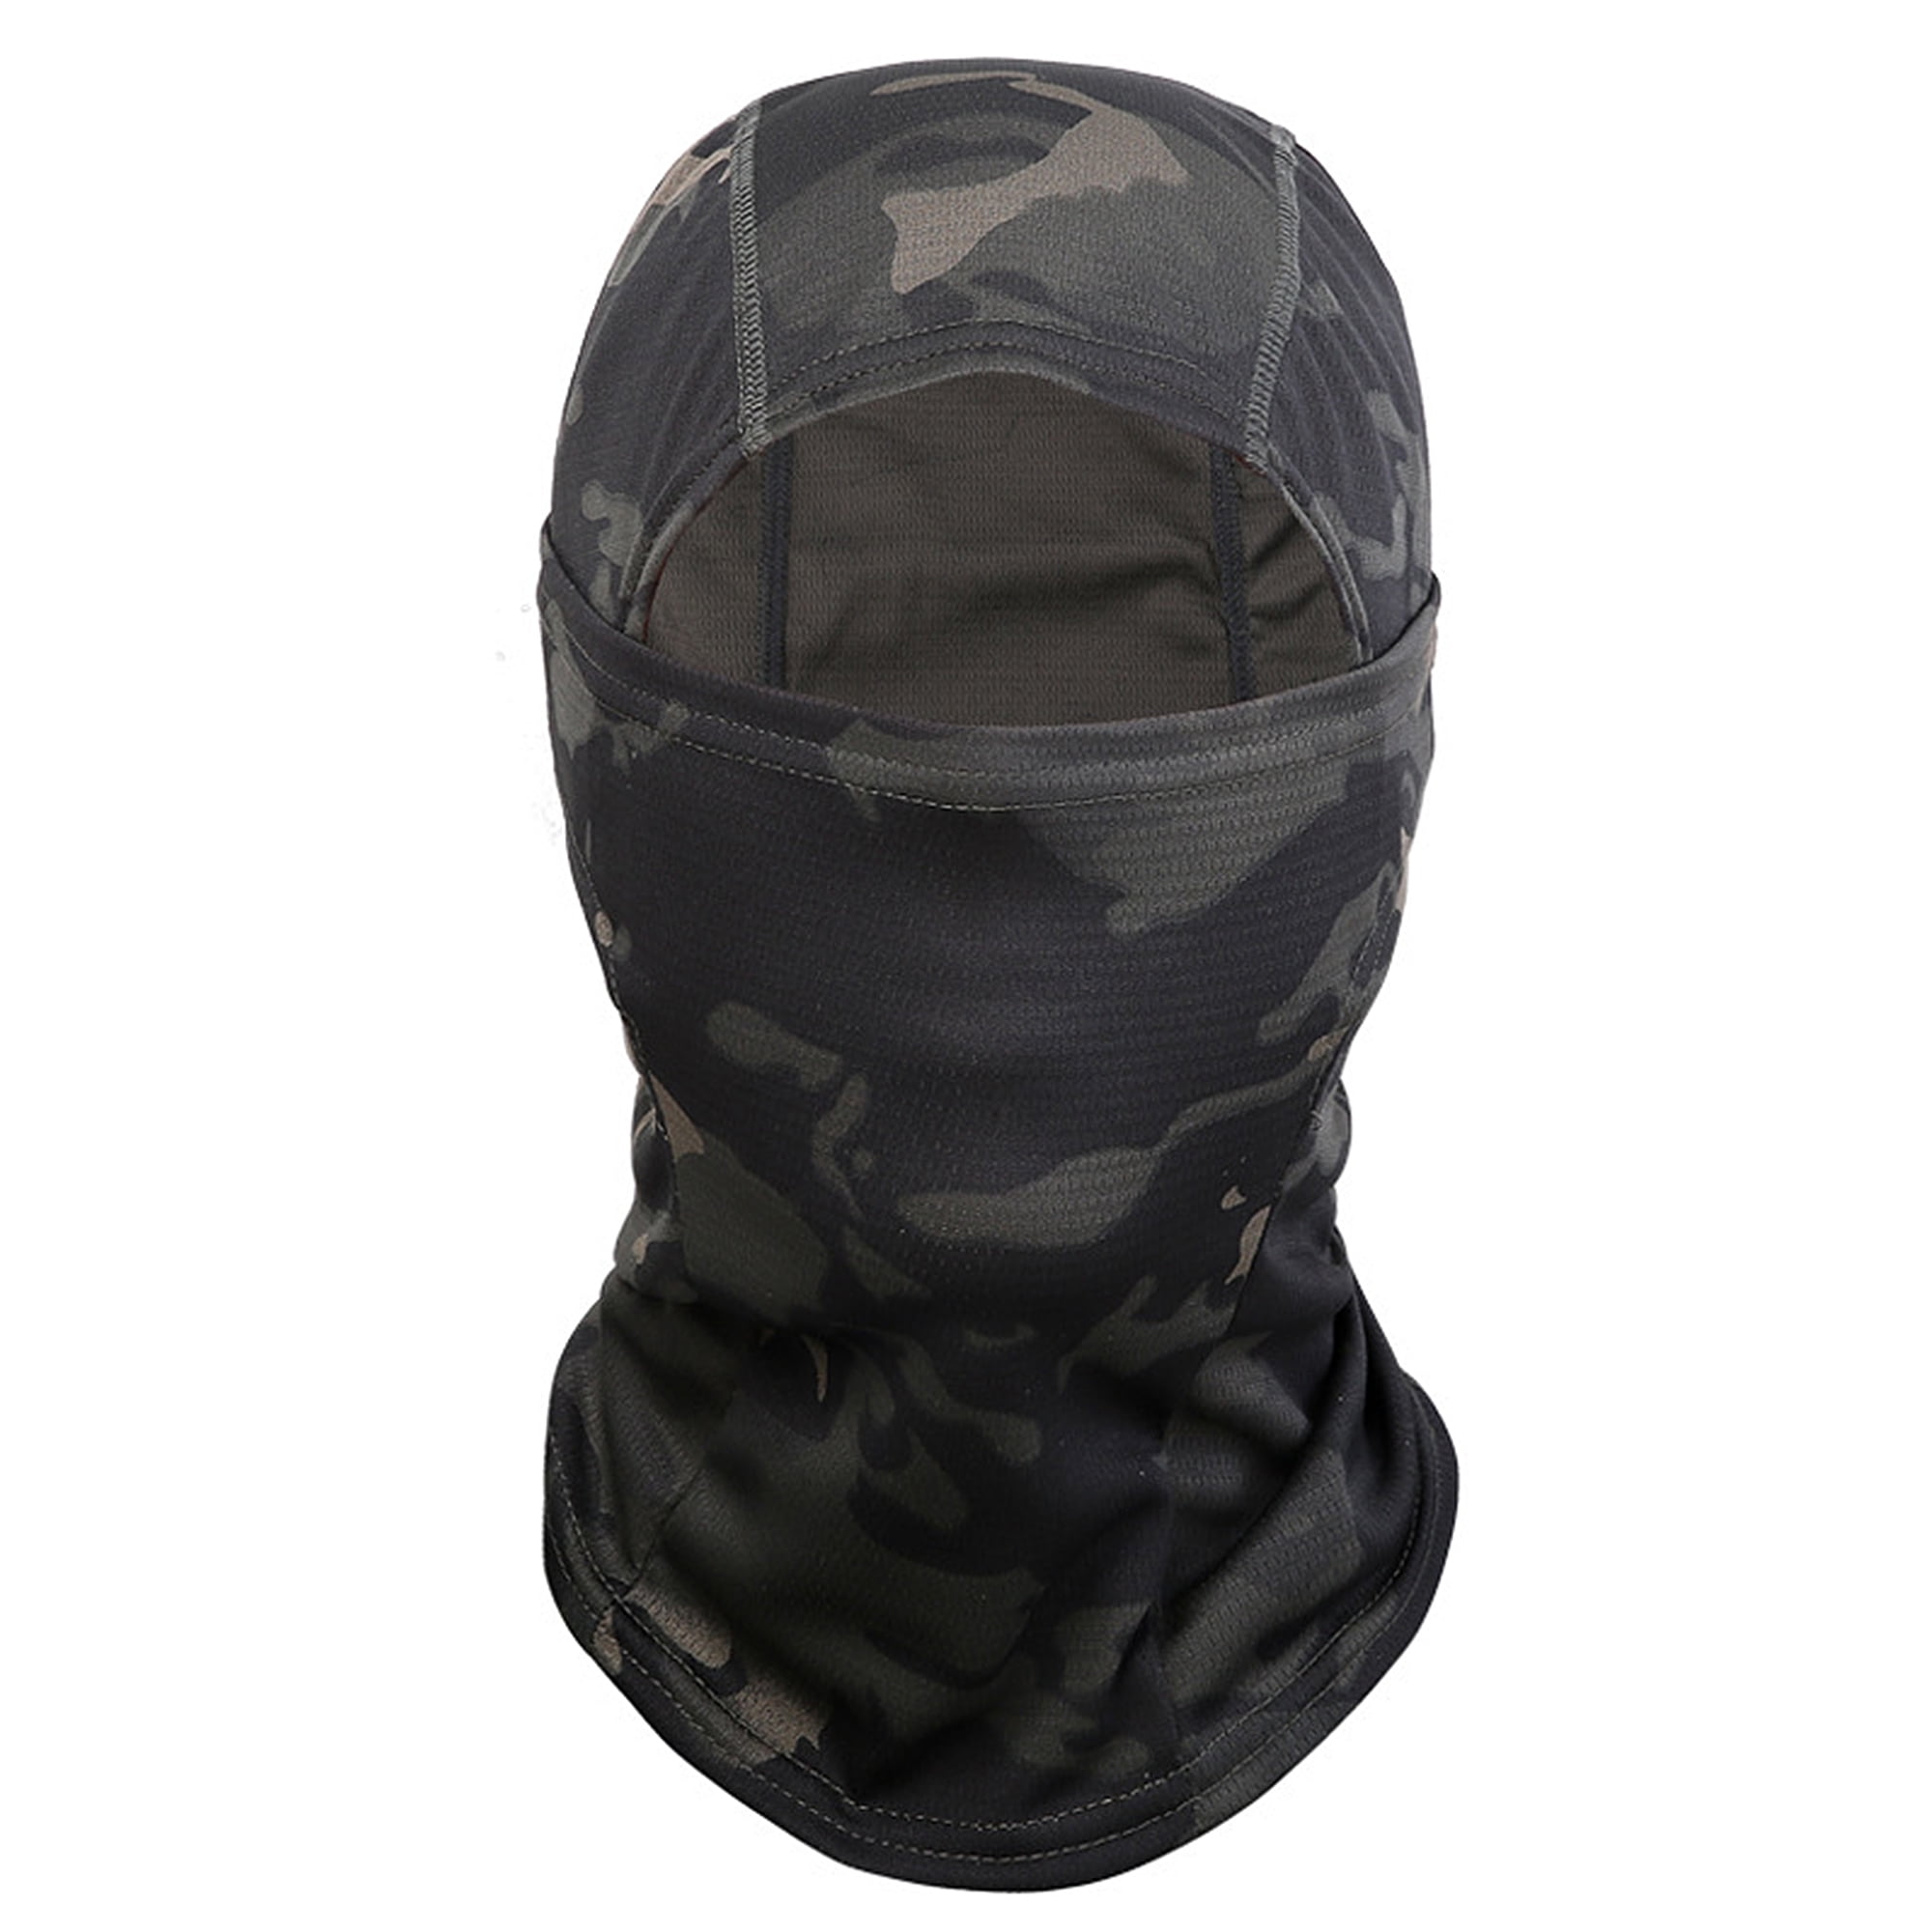 Details about   Balaclava Camo Full Face Mask UV Protection for Men Women Sun Hood for Outdoor 